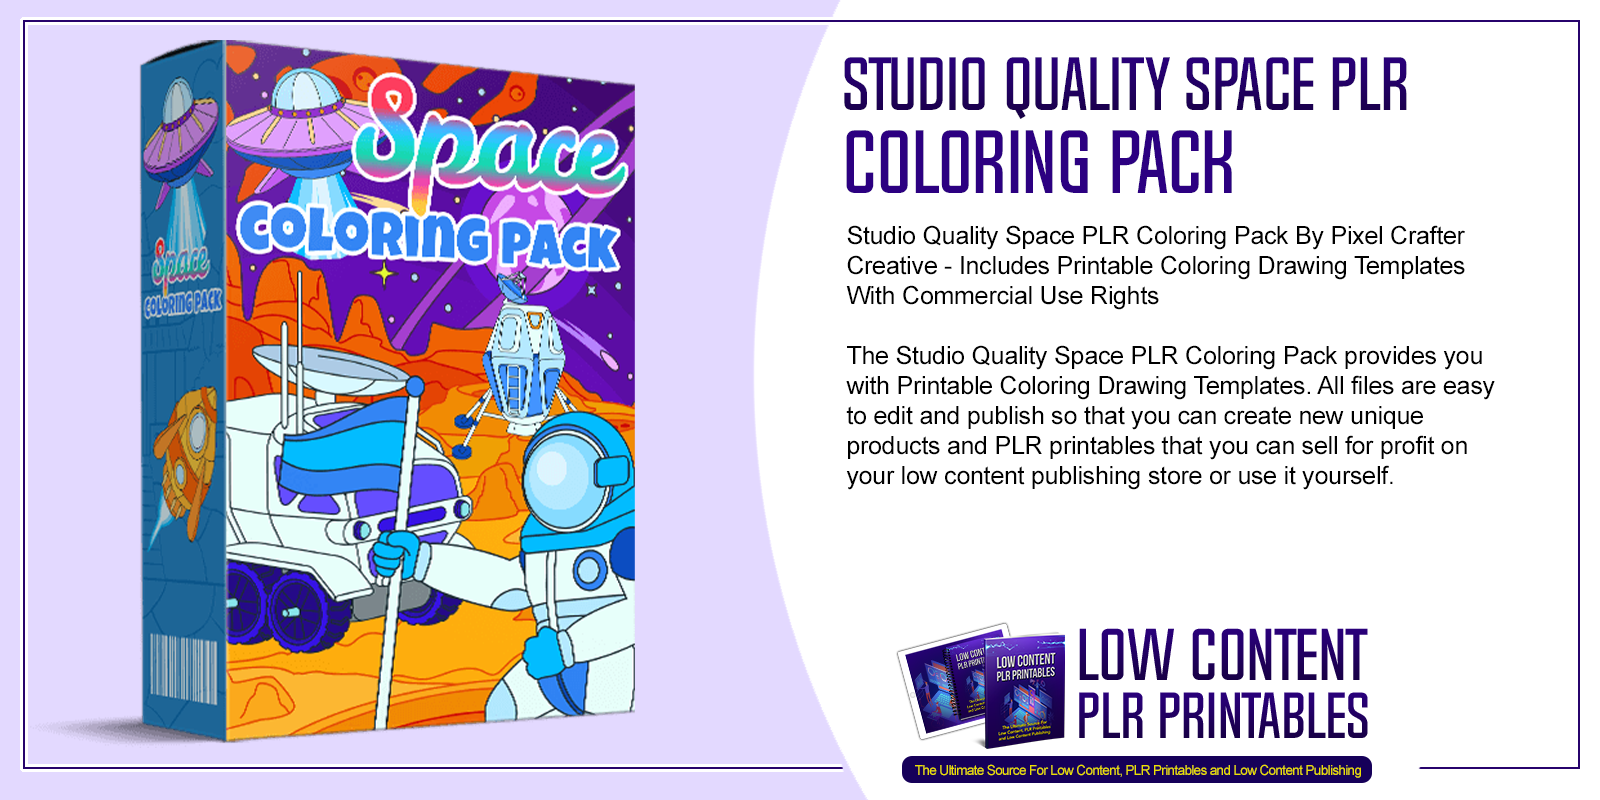 Studio Quality Space PLR Coloring Pack